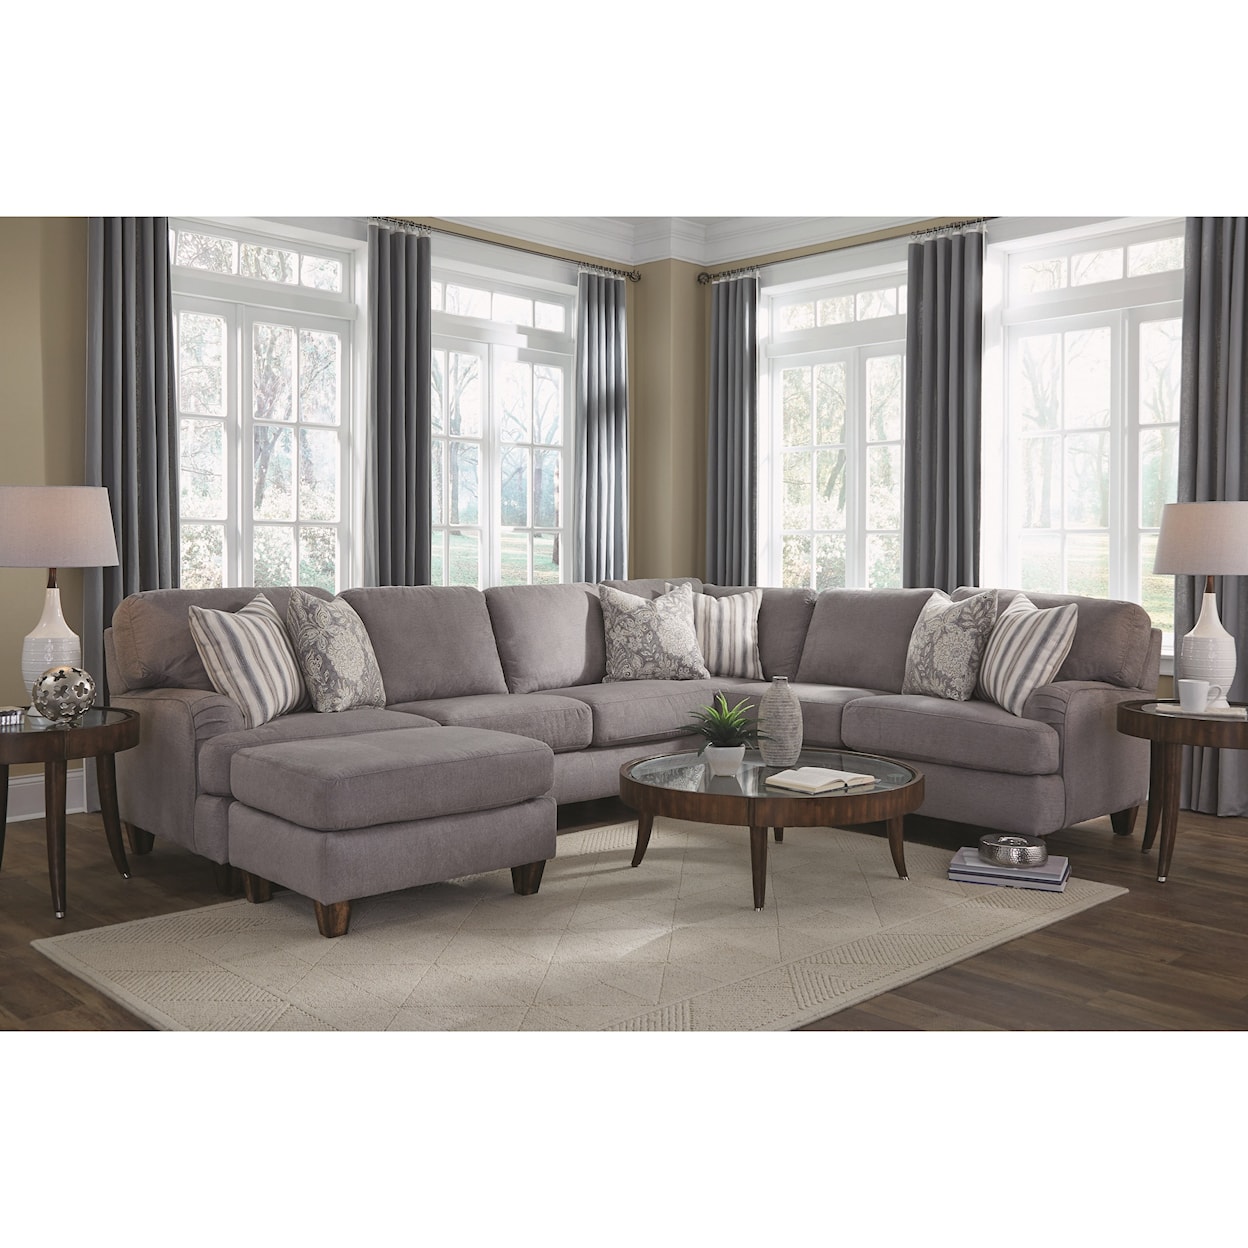 Franklin Haddie Sectional Sofa with 5 Seats